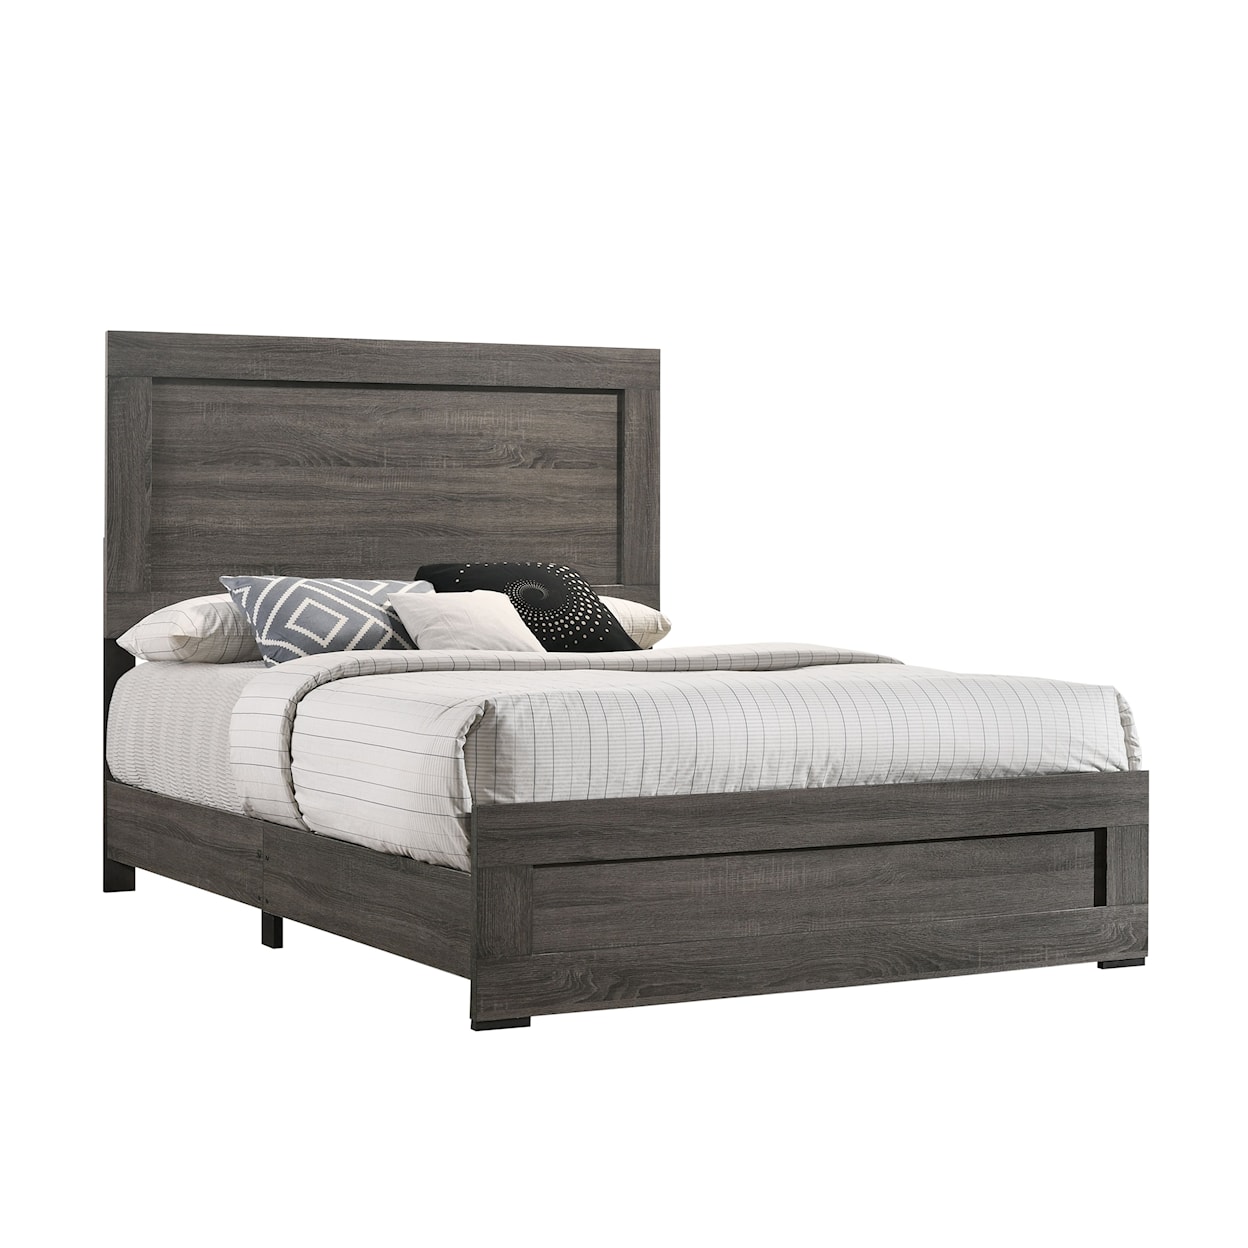 Lifestyle Andre ANDRE GREY KING BED |